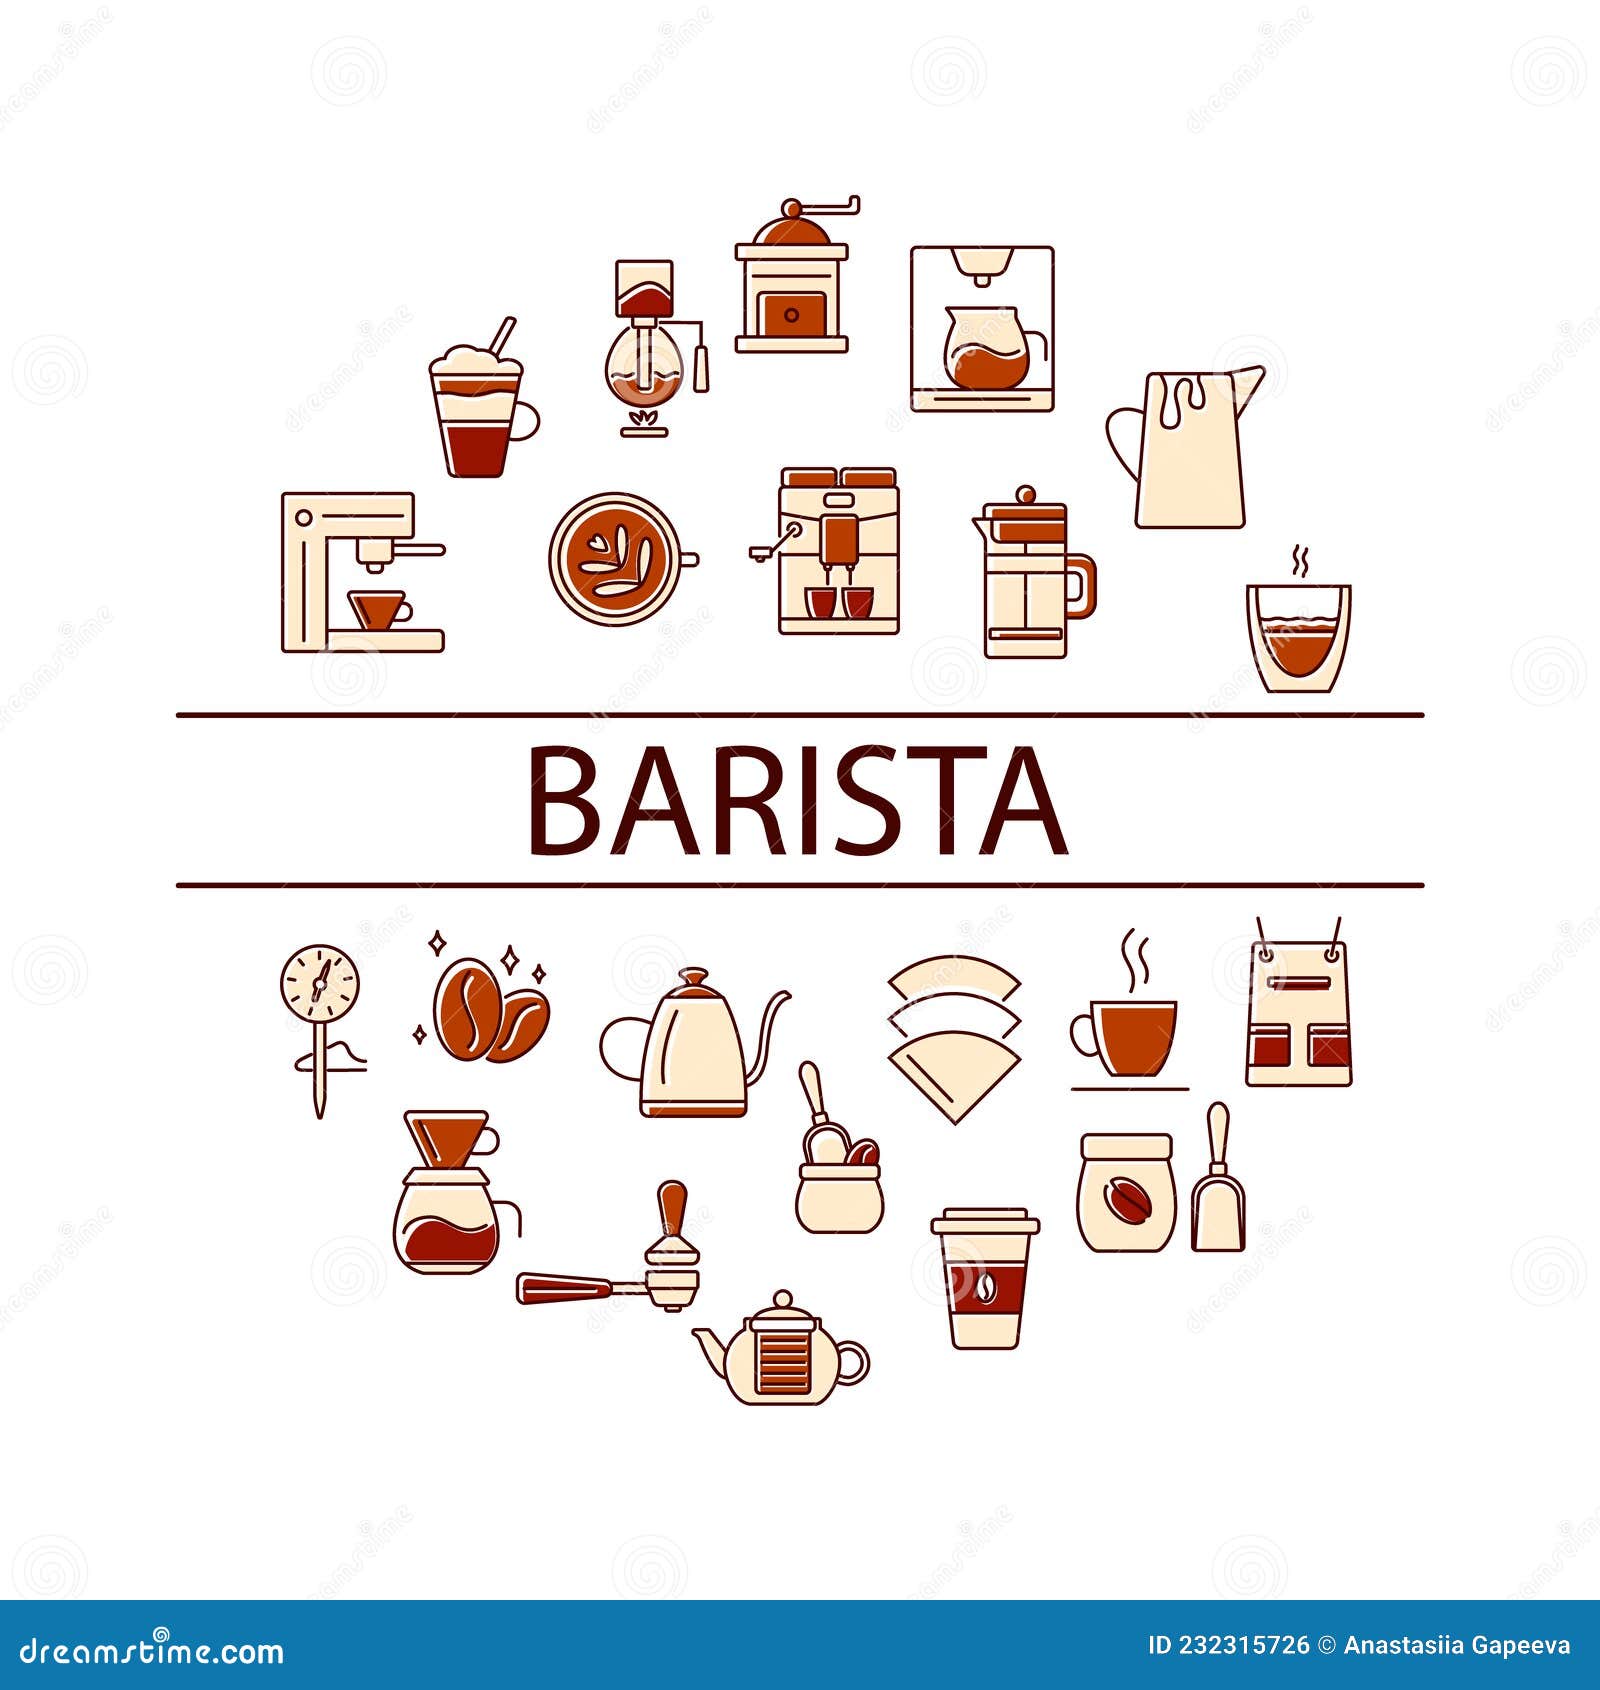 https://thumbs.dreamstime.com/z/barista-coffee-accessories-circle-layout-flat-icons-text-cafe-equipment-isolated-vector-illustration-headline-making-232315726.jpg